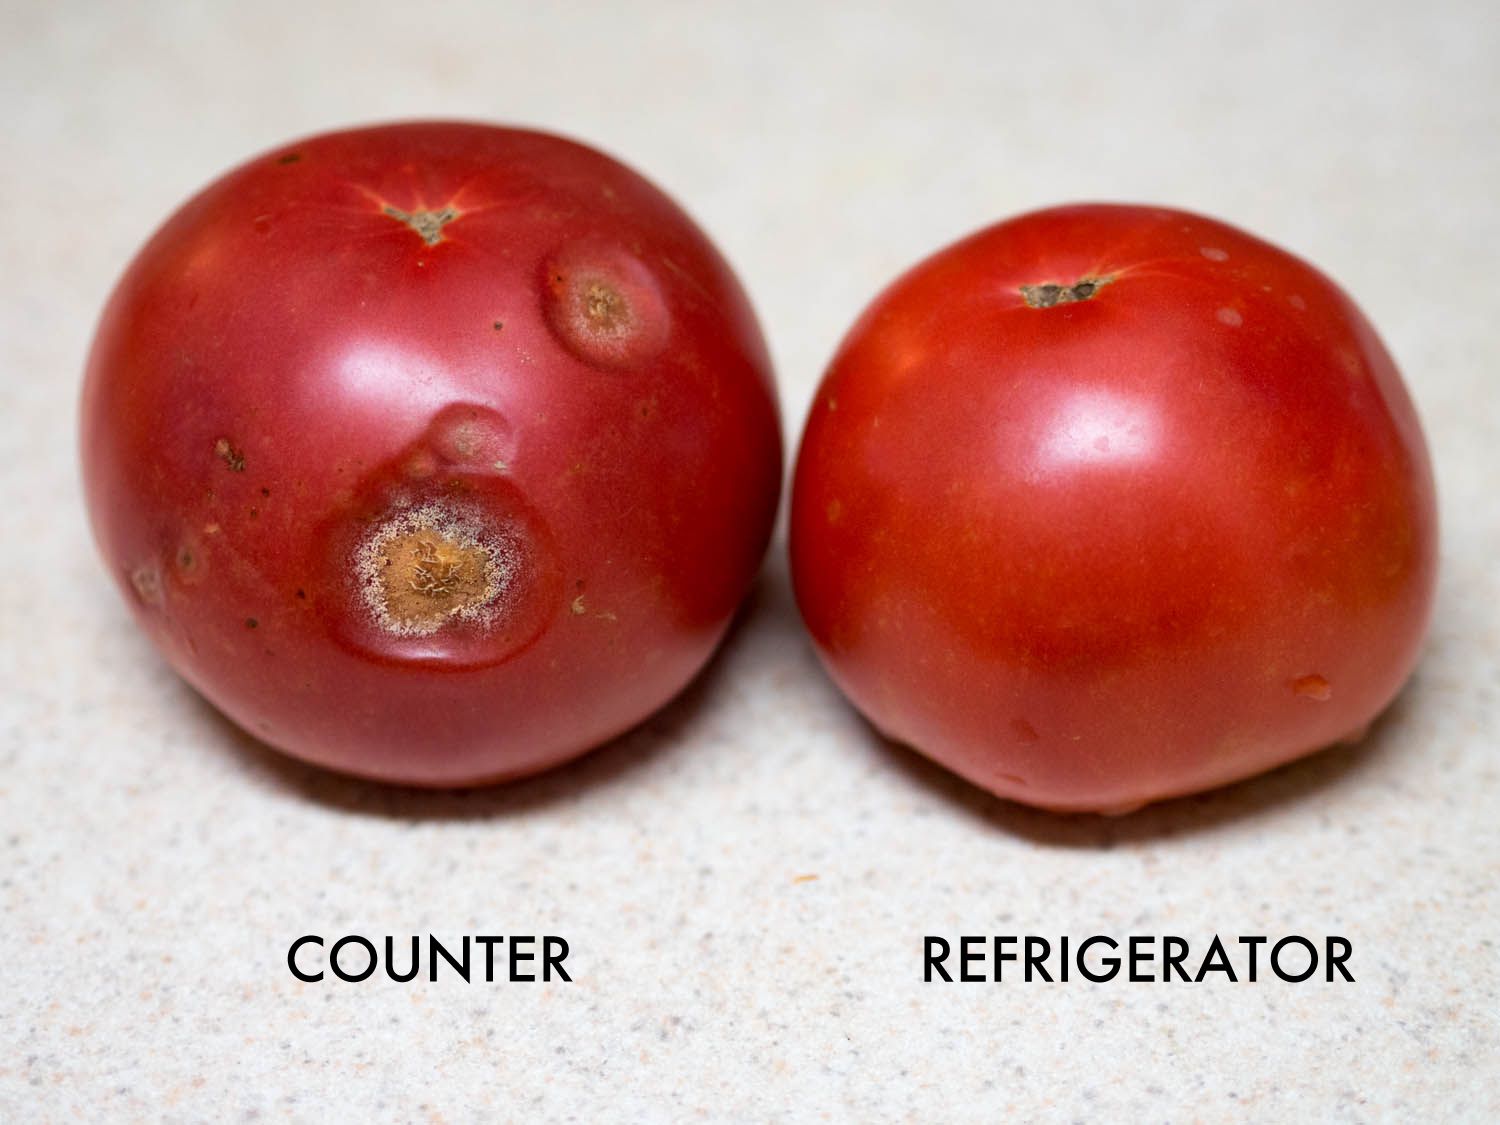 A tomato on the left that has been stored on the countertop for four days and has started to rot, next to a tomato on the right that was stored in the refrigerator for the same amount of time, which is still unspoiled.